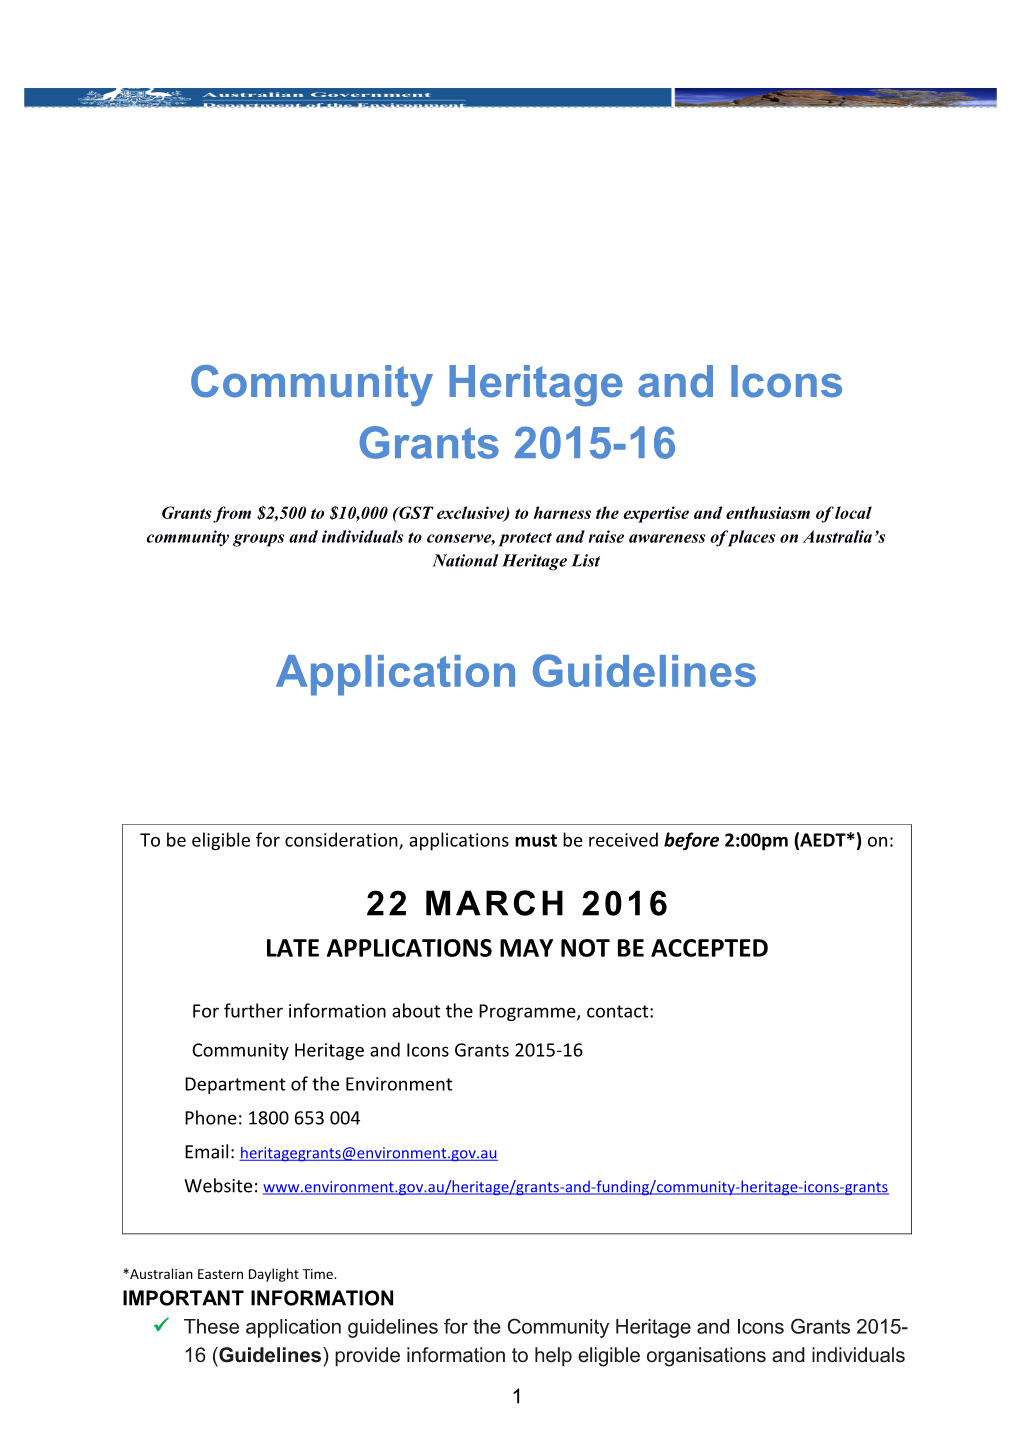 Community Heritage and Icons Grants 2015-16 Application Guidelines